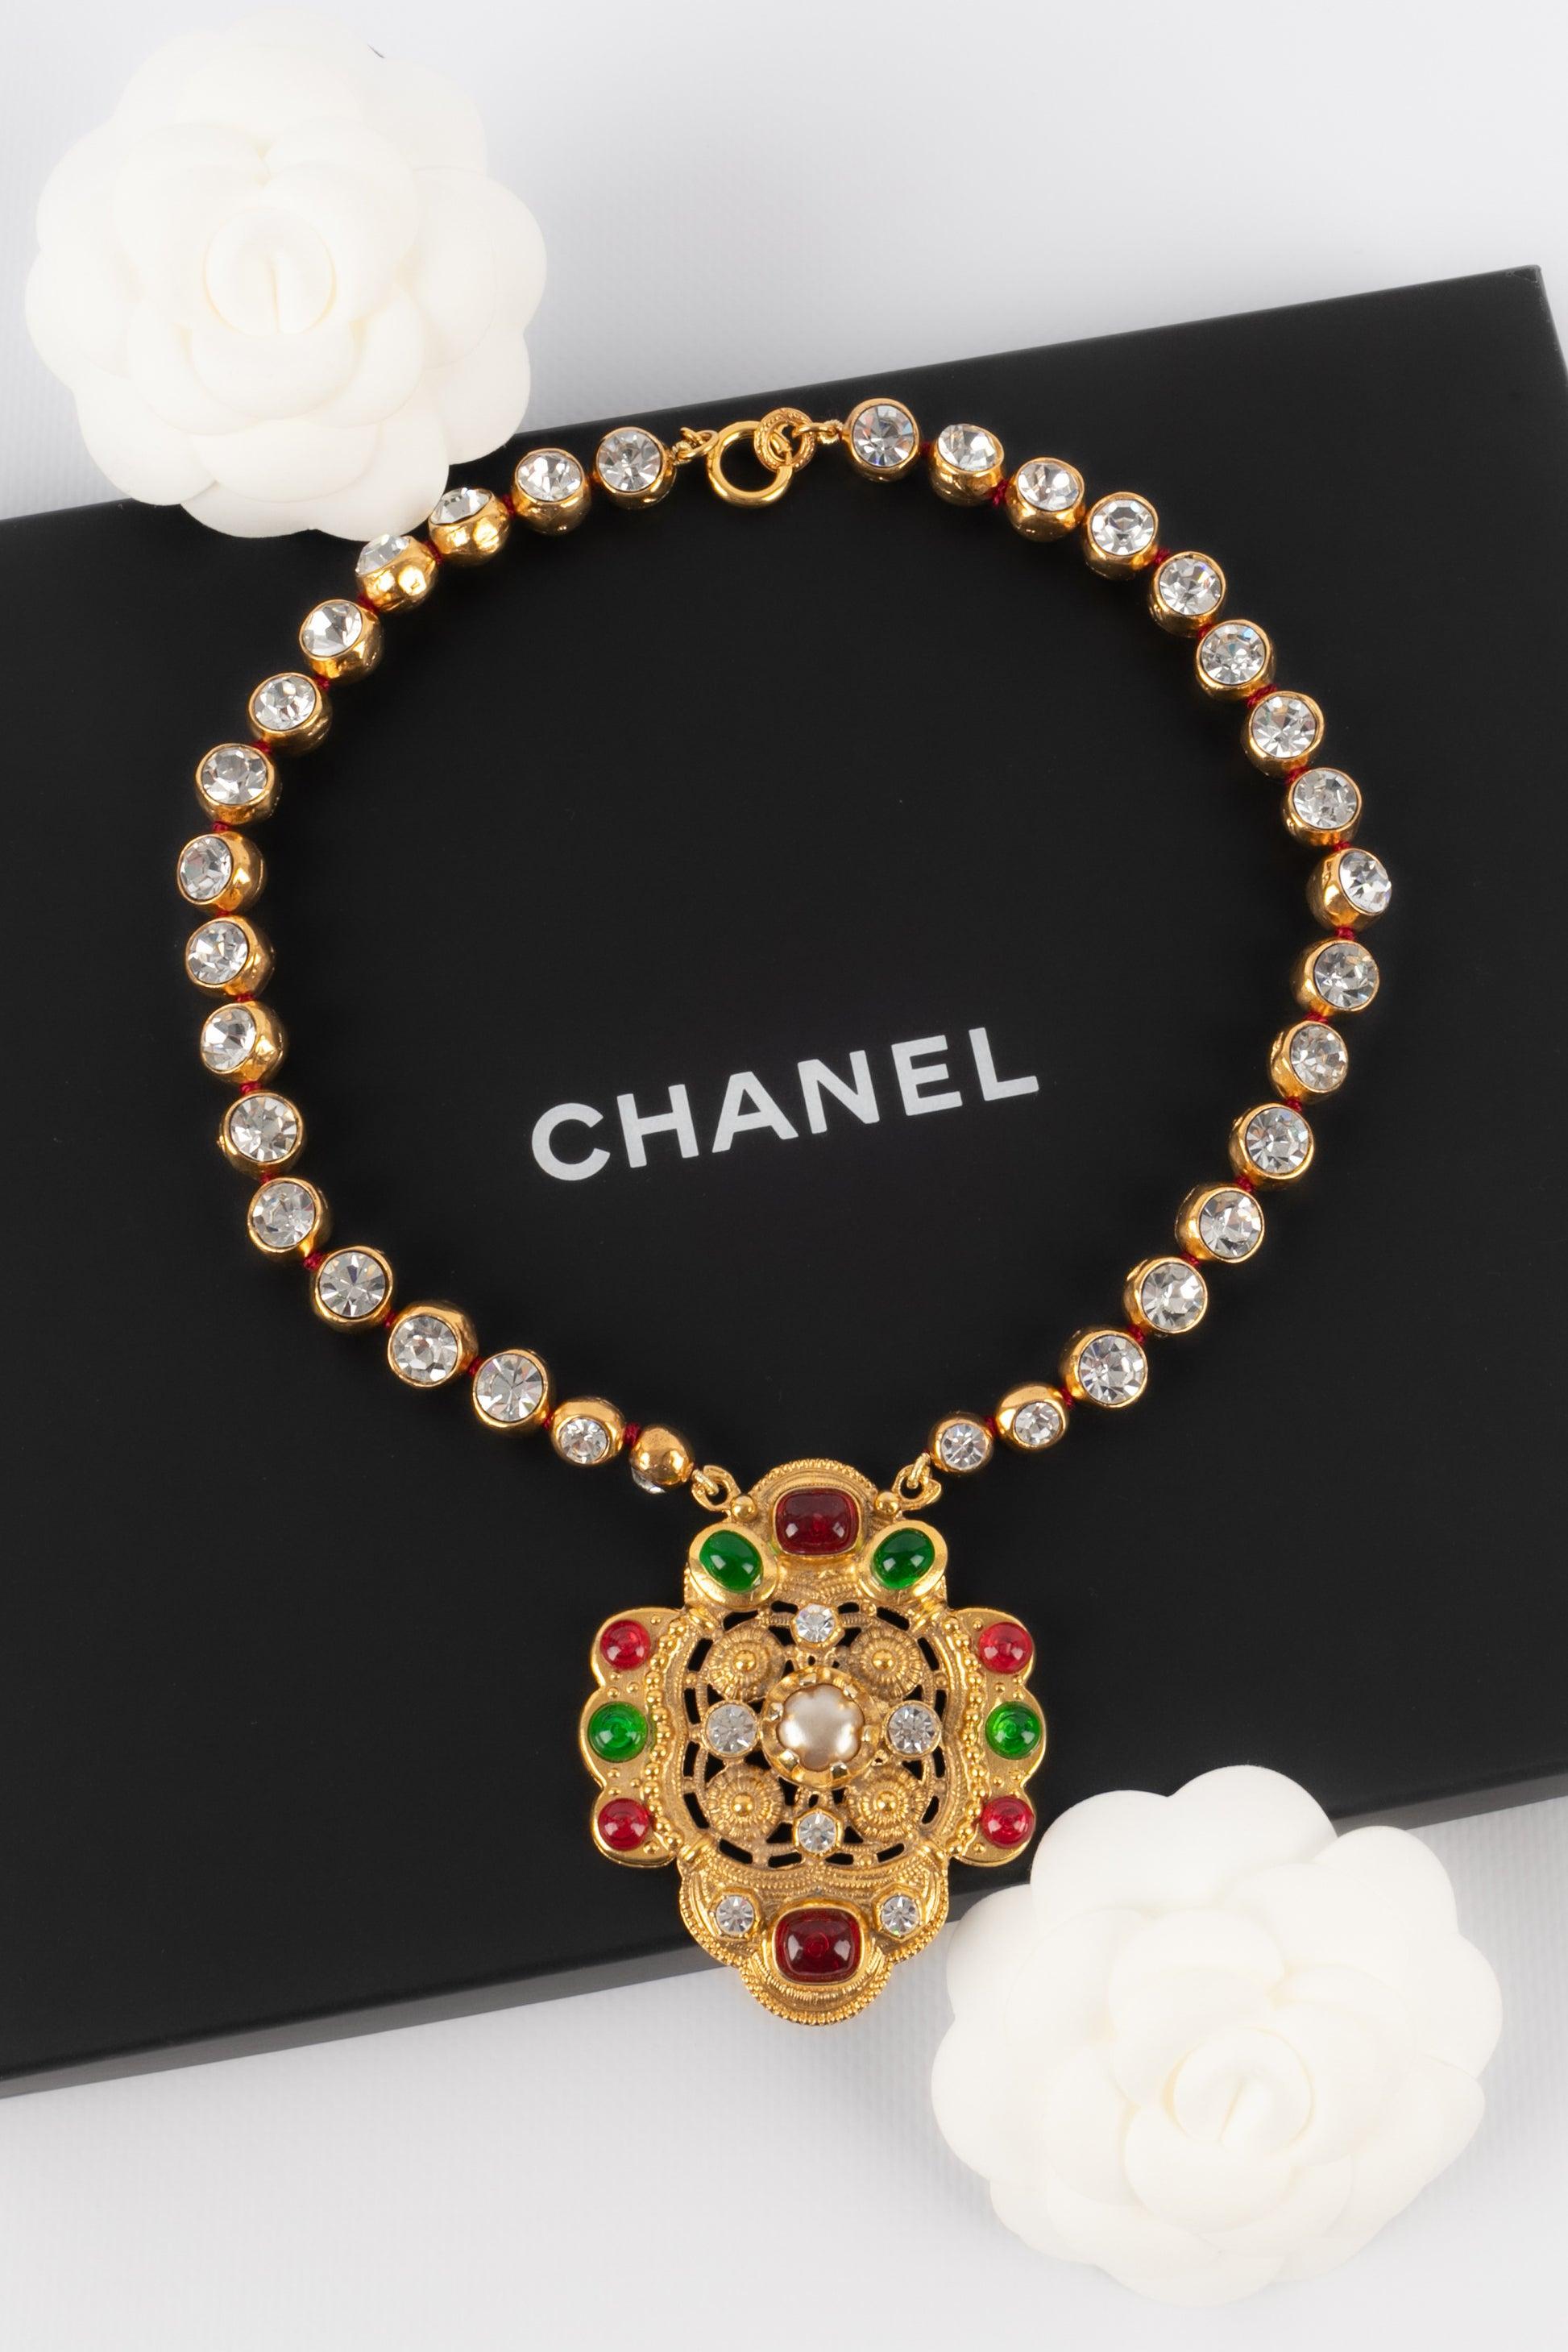 Chanel - (Made in France) Golden metal Byzantine-style necklace with glass paste and rhinestones. Jewelry from the 1980s.
 
 Additional information: 
 Condition: Very good condition
 Dimensions: Length: 45 cm
 
 Seller Reference: CB116
